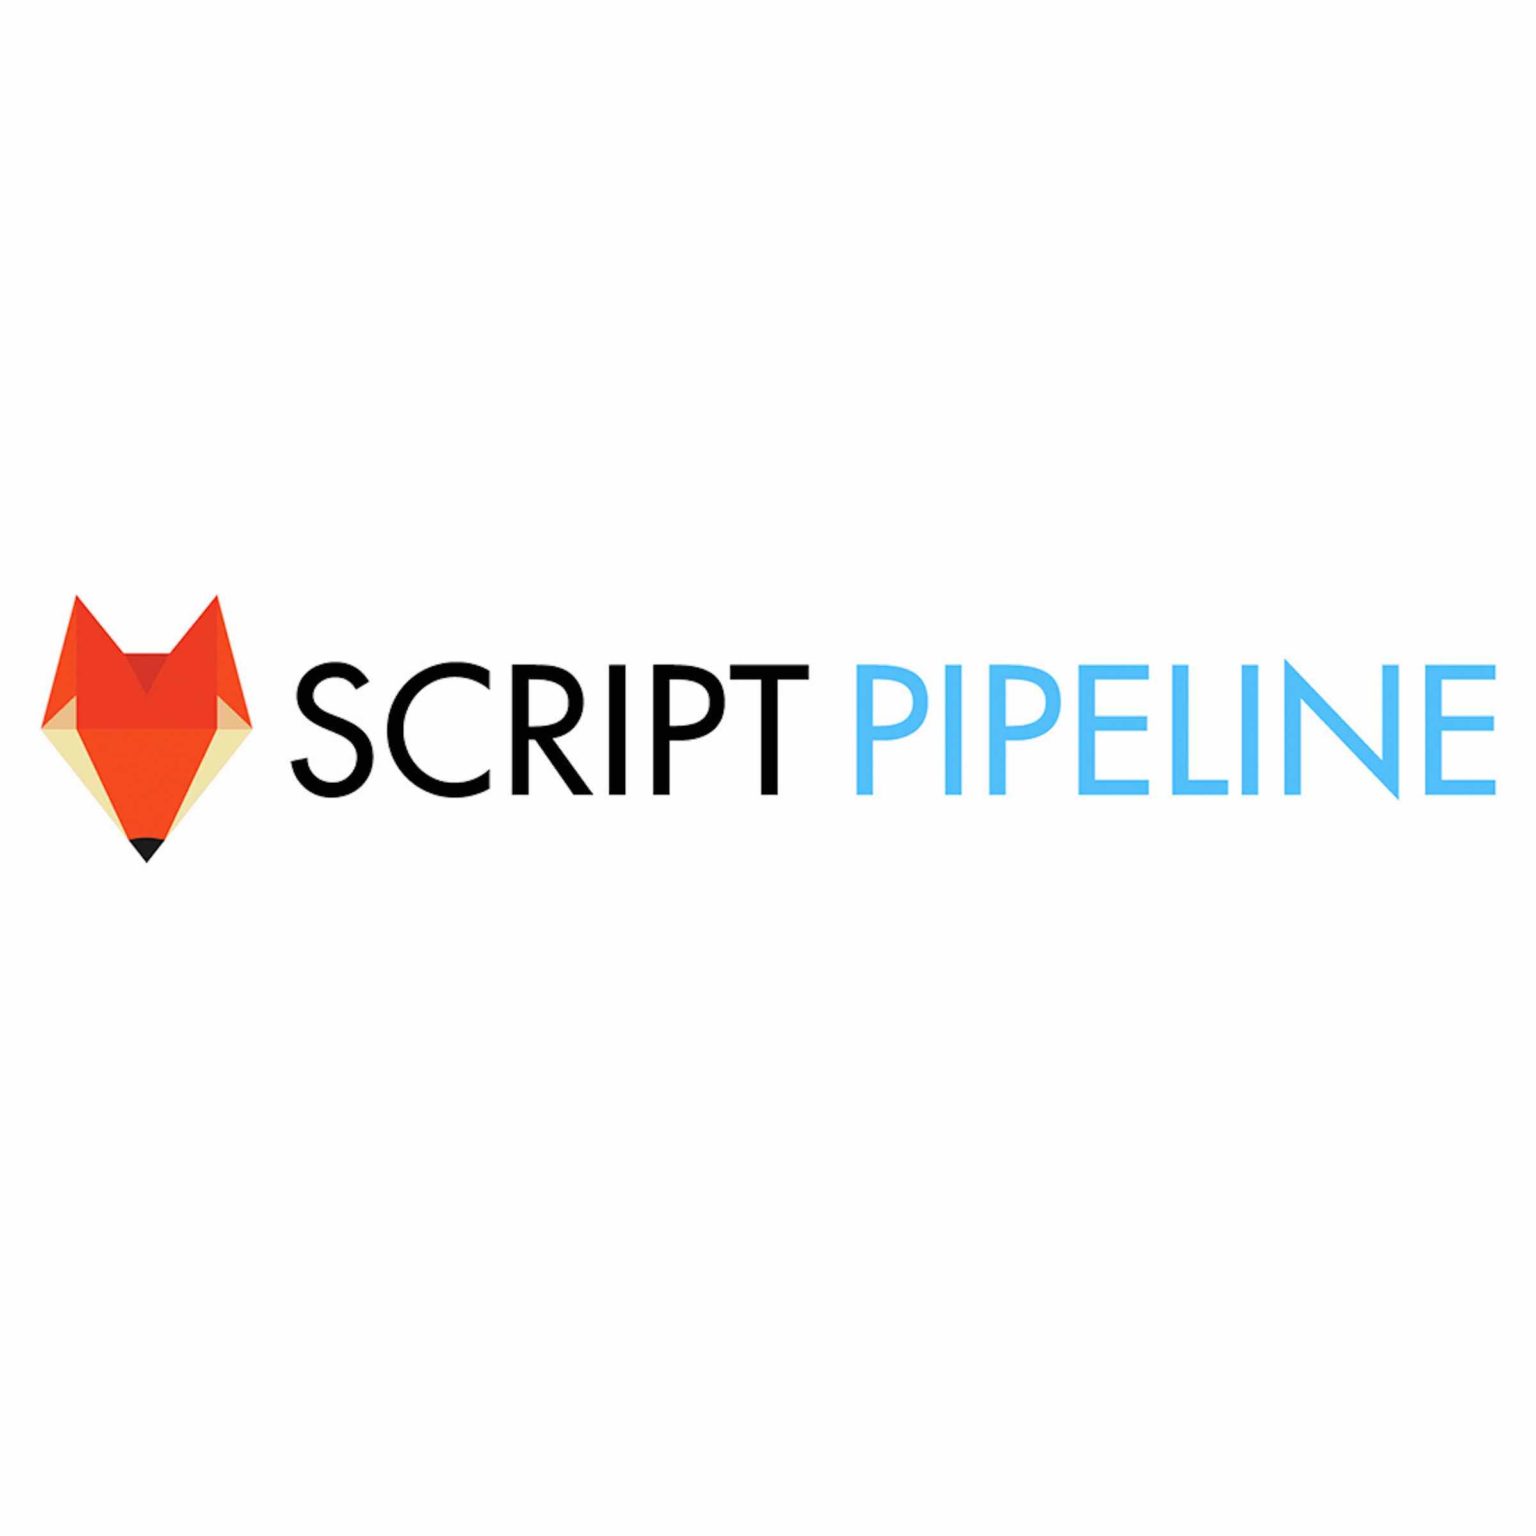 Connections are the game in the media industry. Script Pipeline is the perfect competition for newcomers. Here's why you should enter.